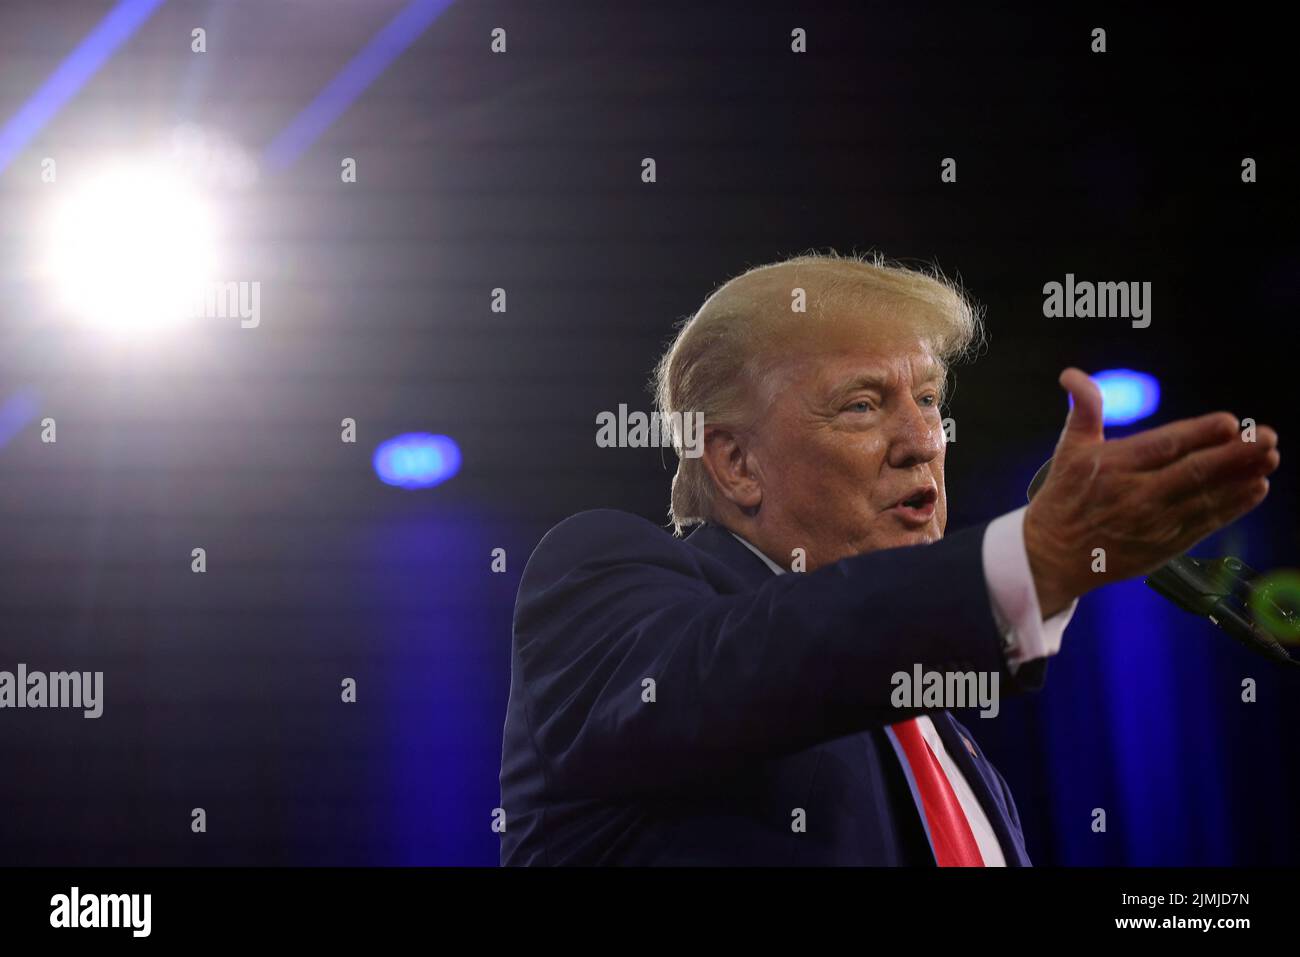 Former U.S. President Donald Trump speaks at the Conservative Political Action Conference (CPAC) in Dallas, Texas, U.S., August 6, 2022.  REUTERS/Brian Snyder Stock Photo